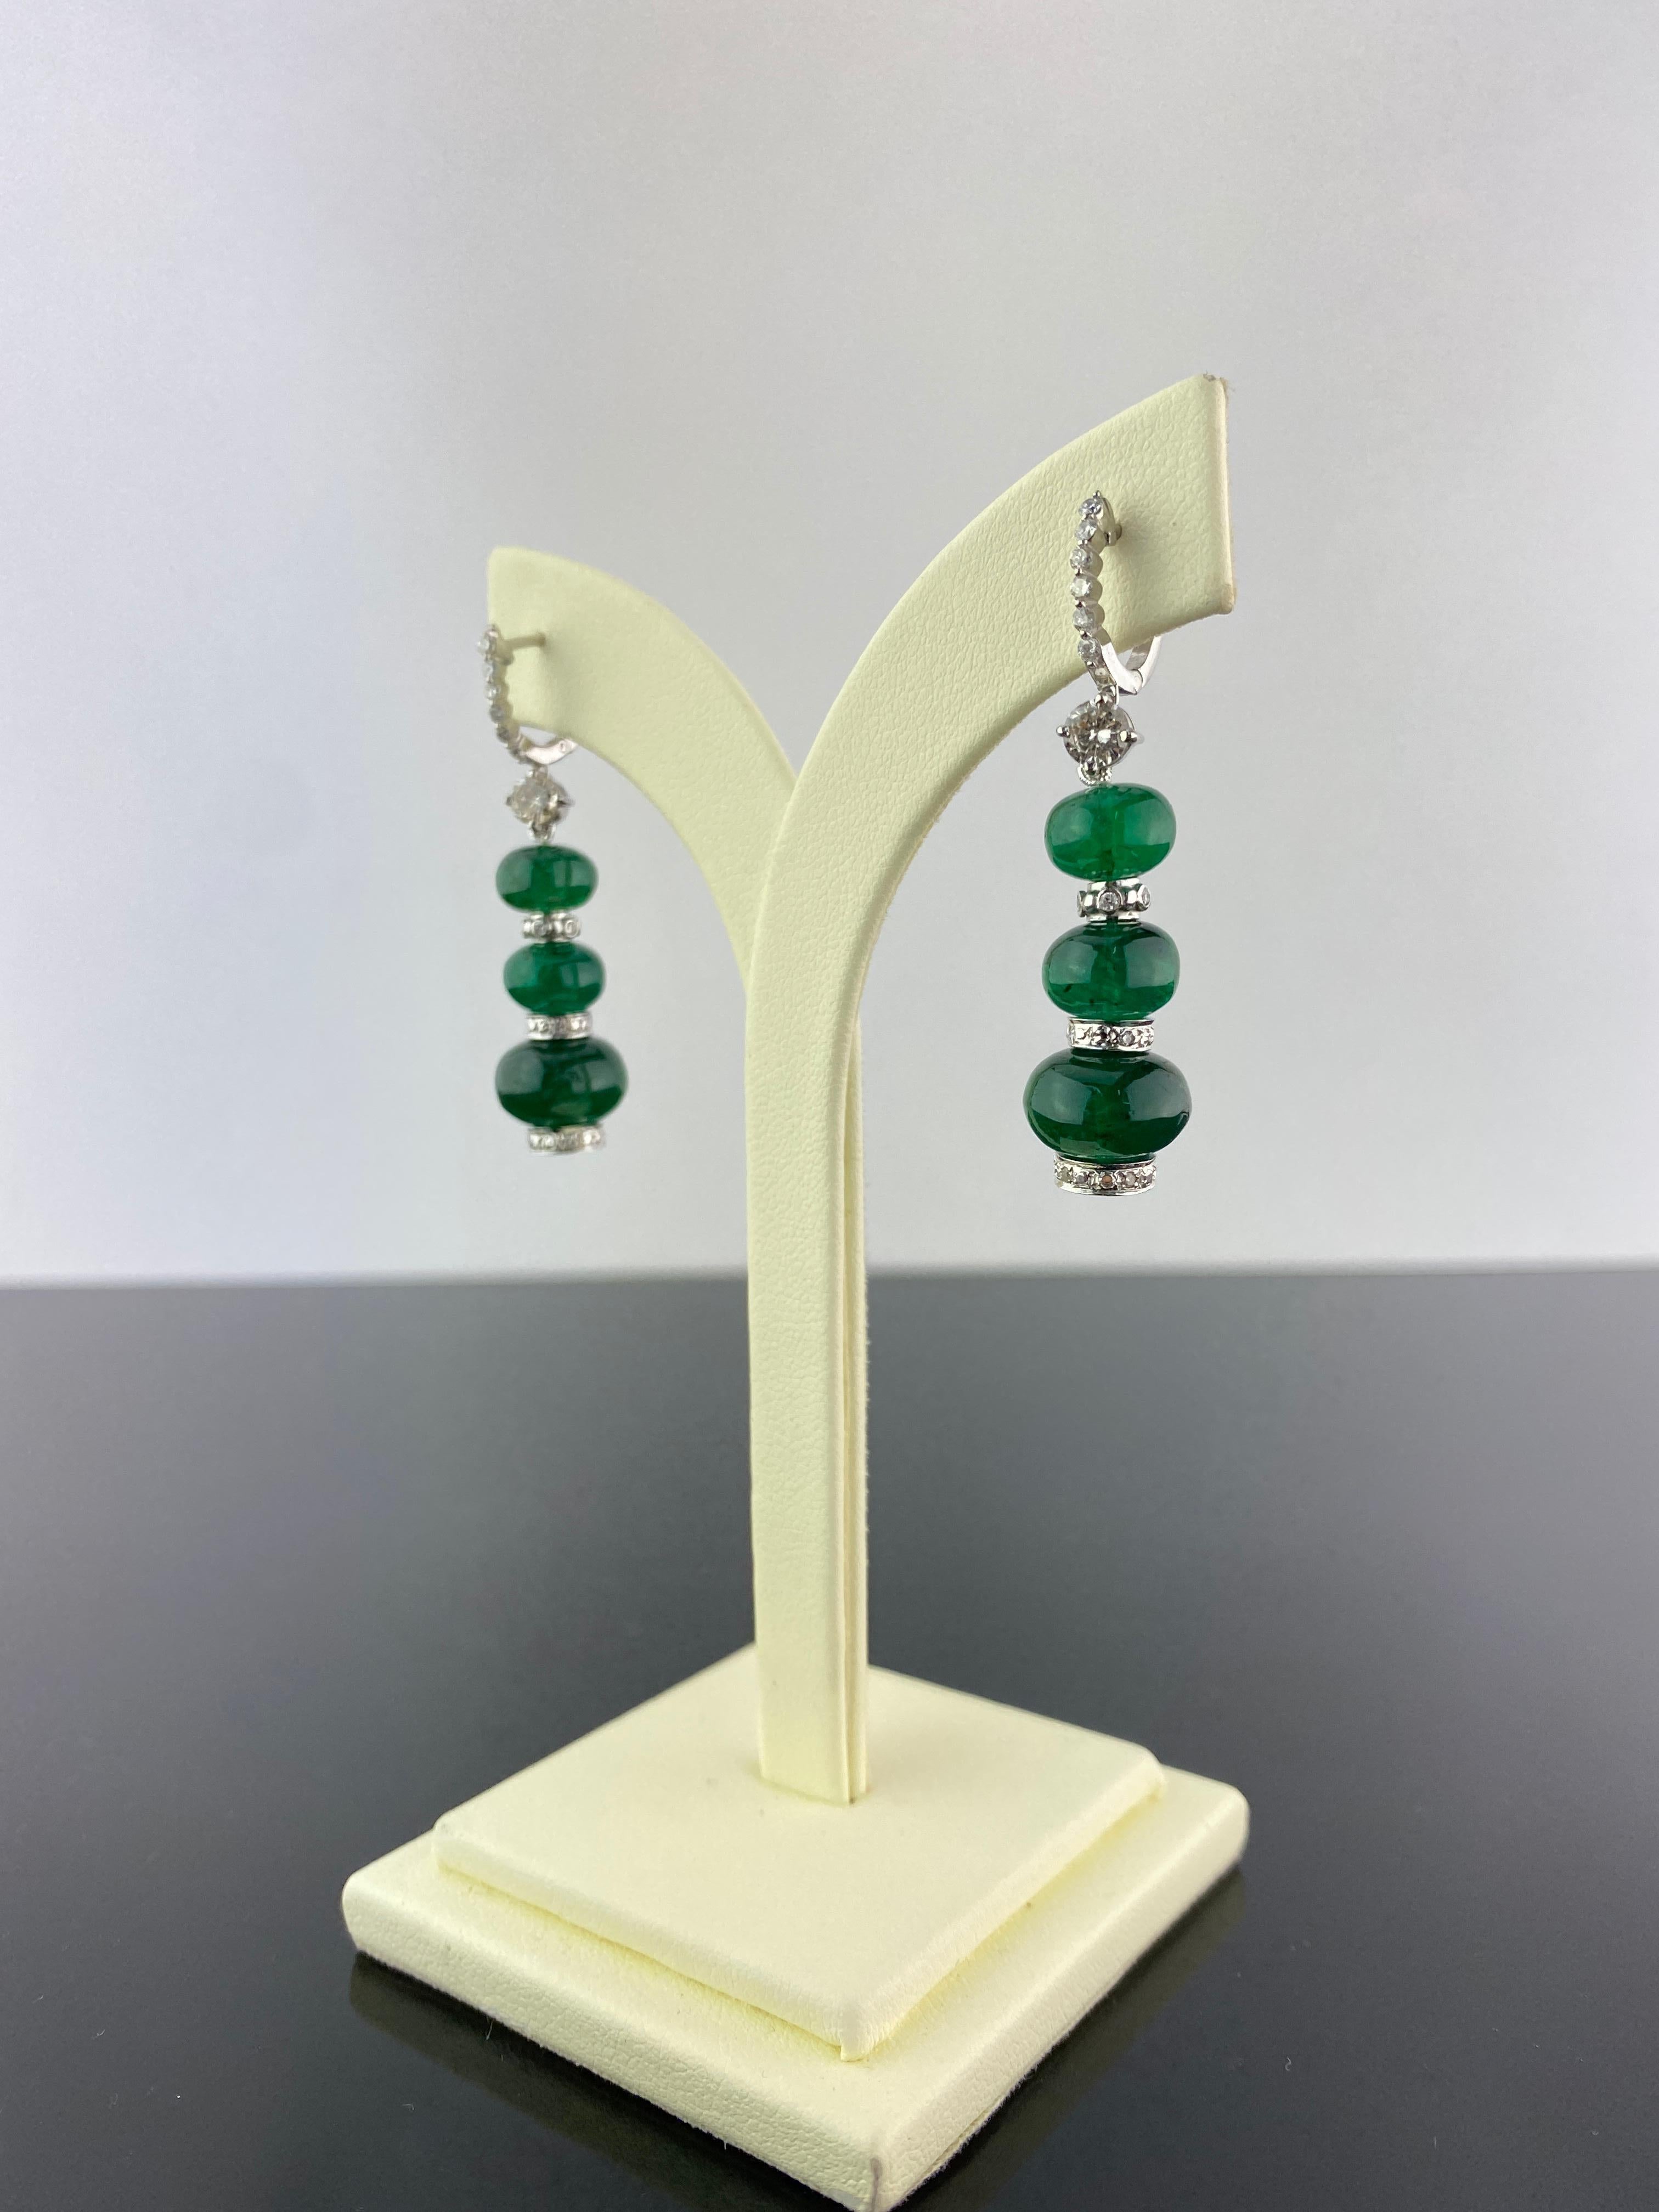 A pair of 32 carat Zambian Emerald beads earrings, transparent with few natural inclusions. These are a classic piece, with a modern touch - the quality of the emeralds speaks for itself! The emerald beads are absoluately natural, with no chemical